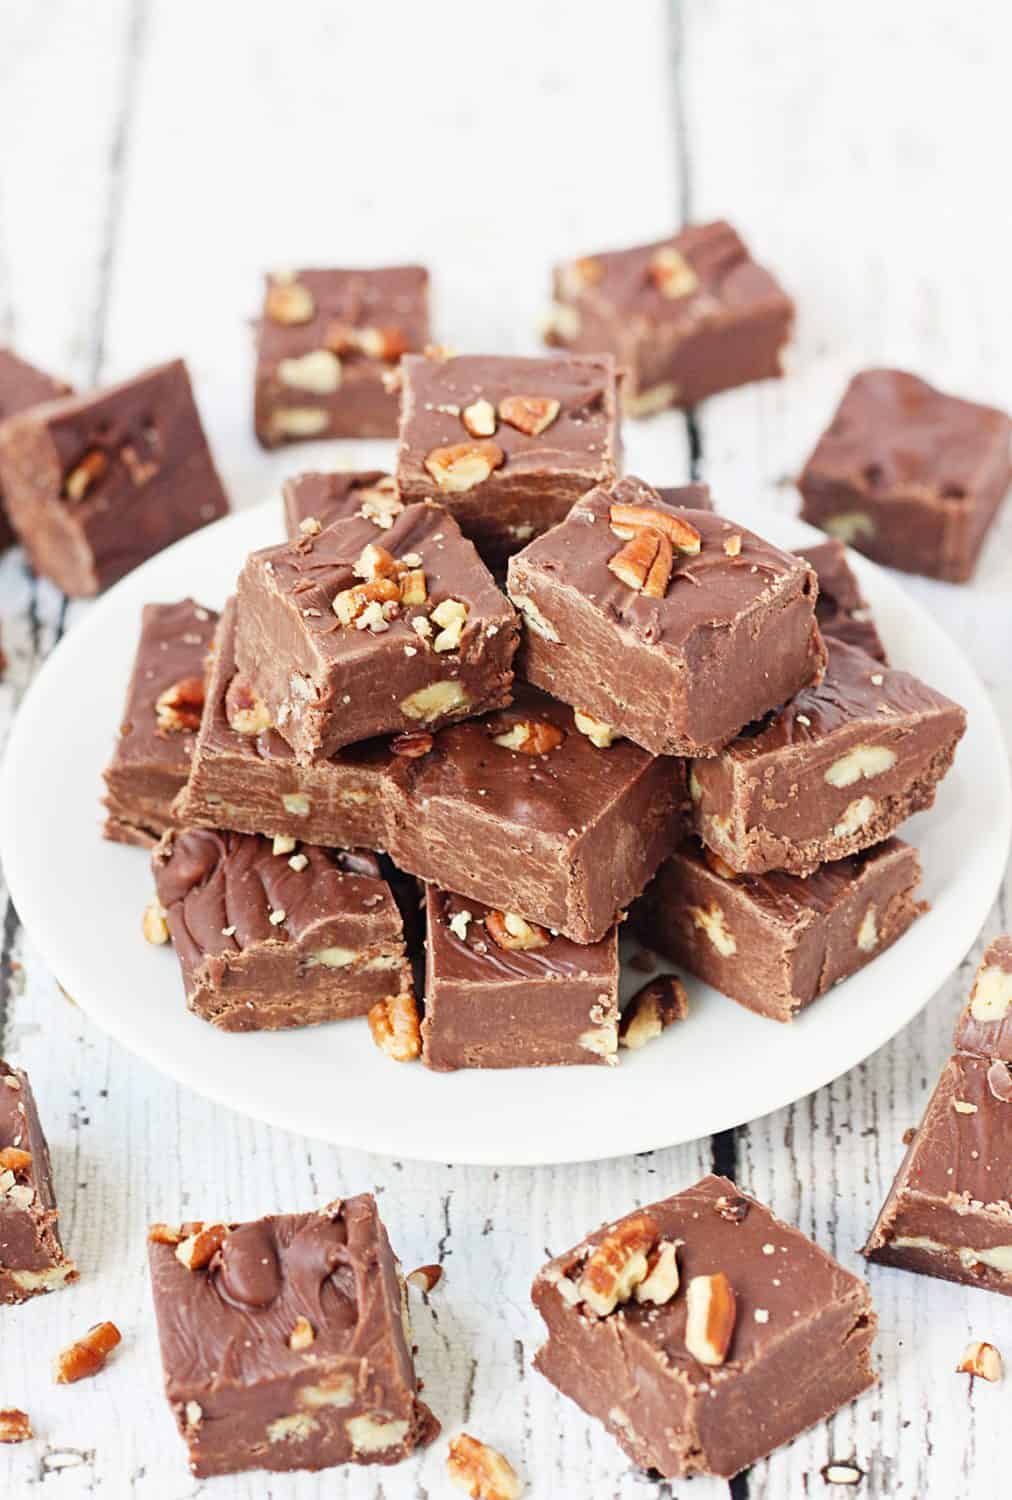 Grammy's Easy Homemade Fudge -- My grammy's easy homemade fudge is seriously the best!